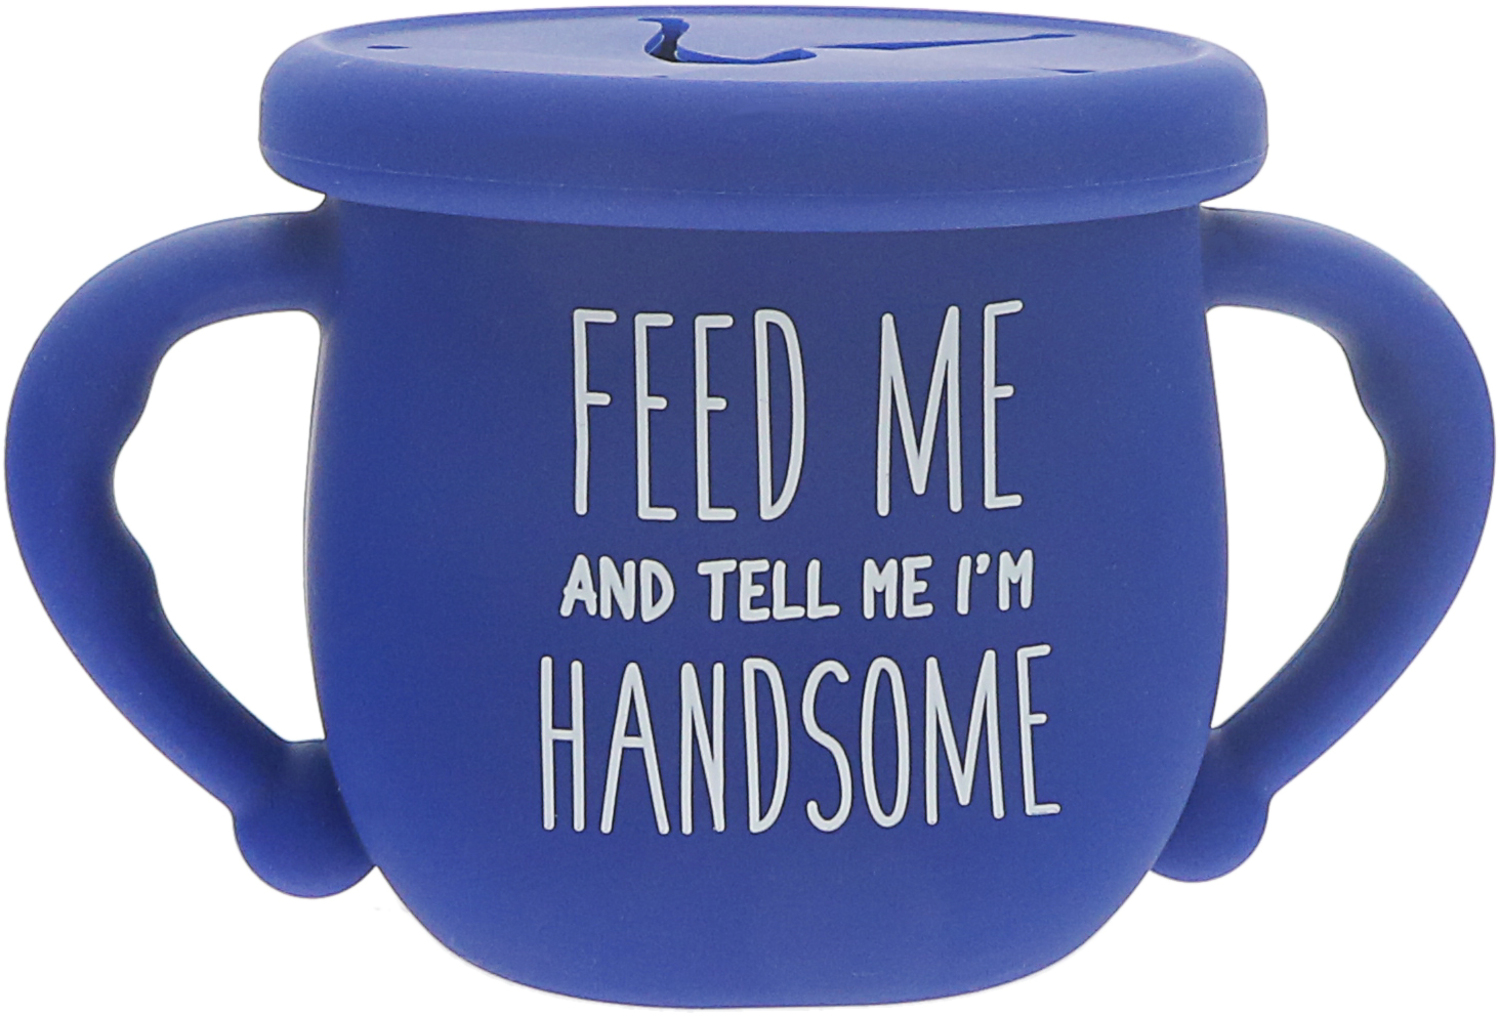 I'm Handsome by Sidewalk Talk - I'm Handsome - 3.5" Silicone Snack Bowl with Lid